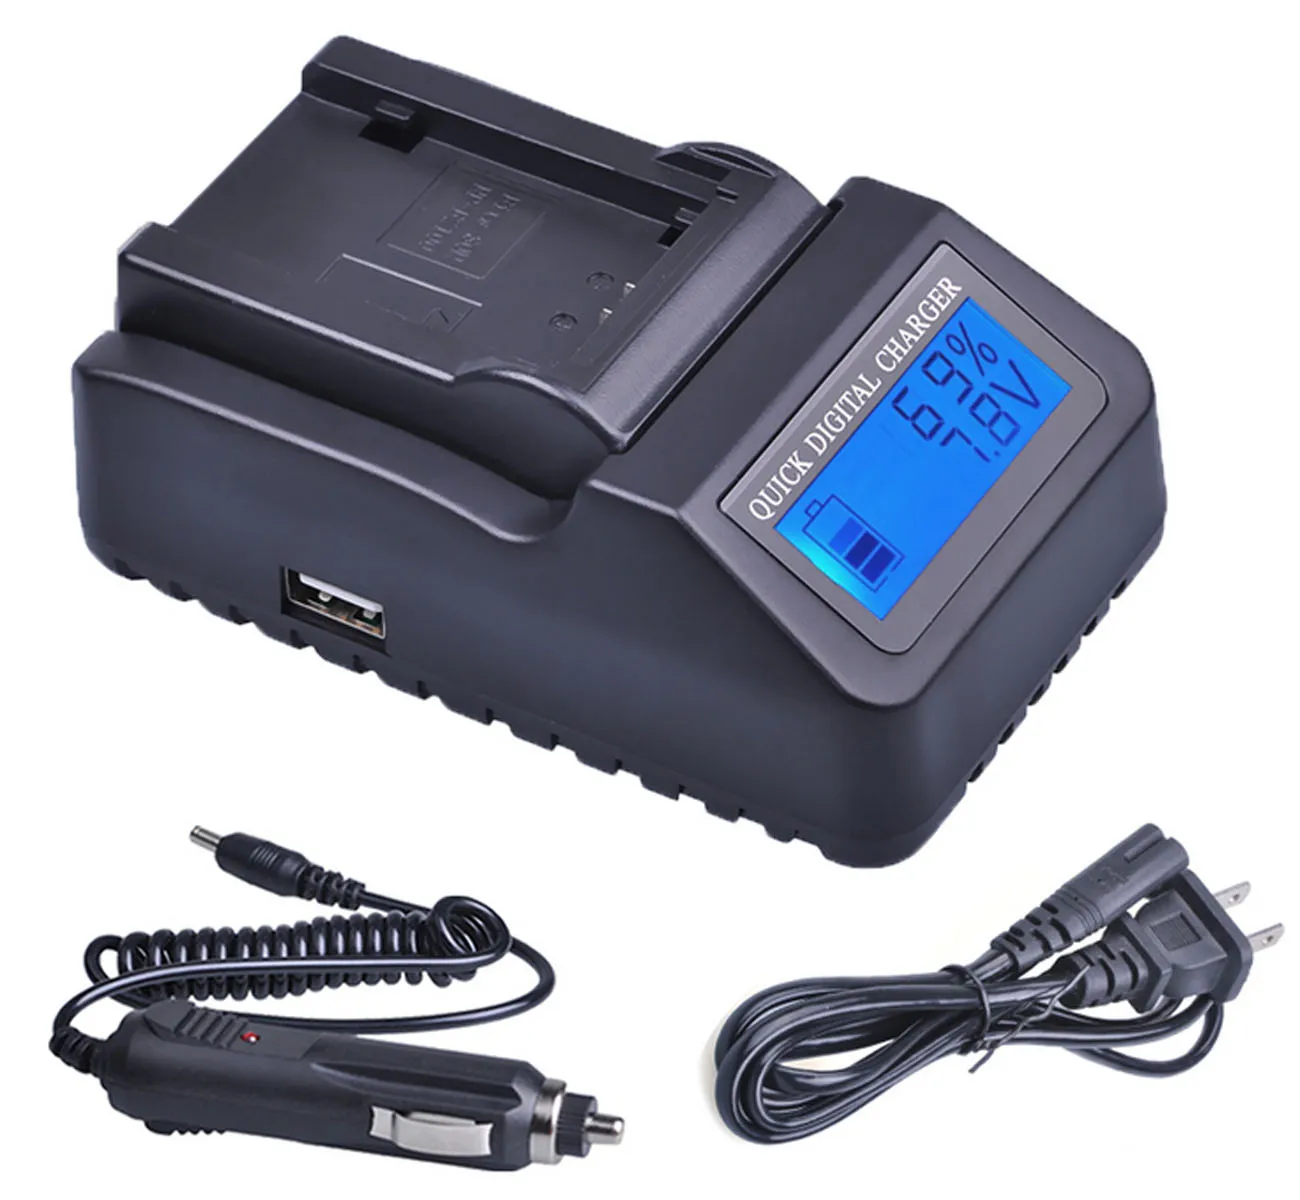 

Battery Charger for Panasonic HDC-HS9, HDC-HS20, HDC-HS100, HDC-HS200, HDC-HS250, HDC-HS300, HDC-HS350, HDC-HS700 Camcorder